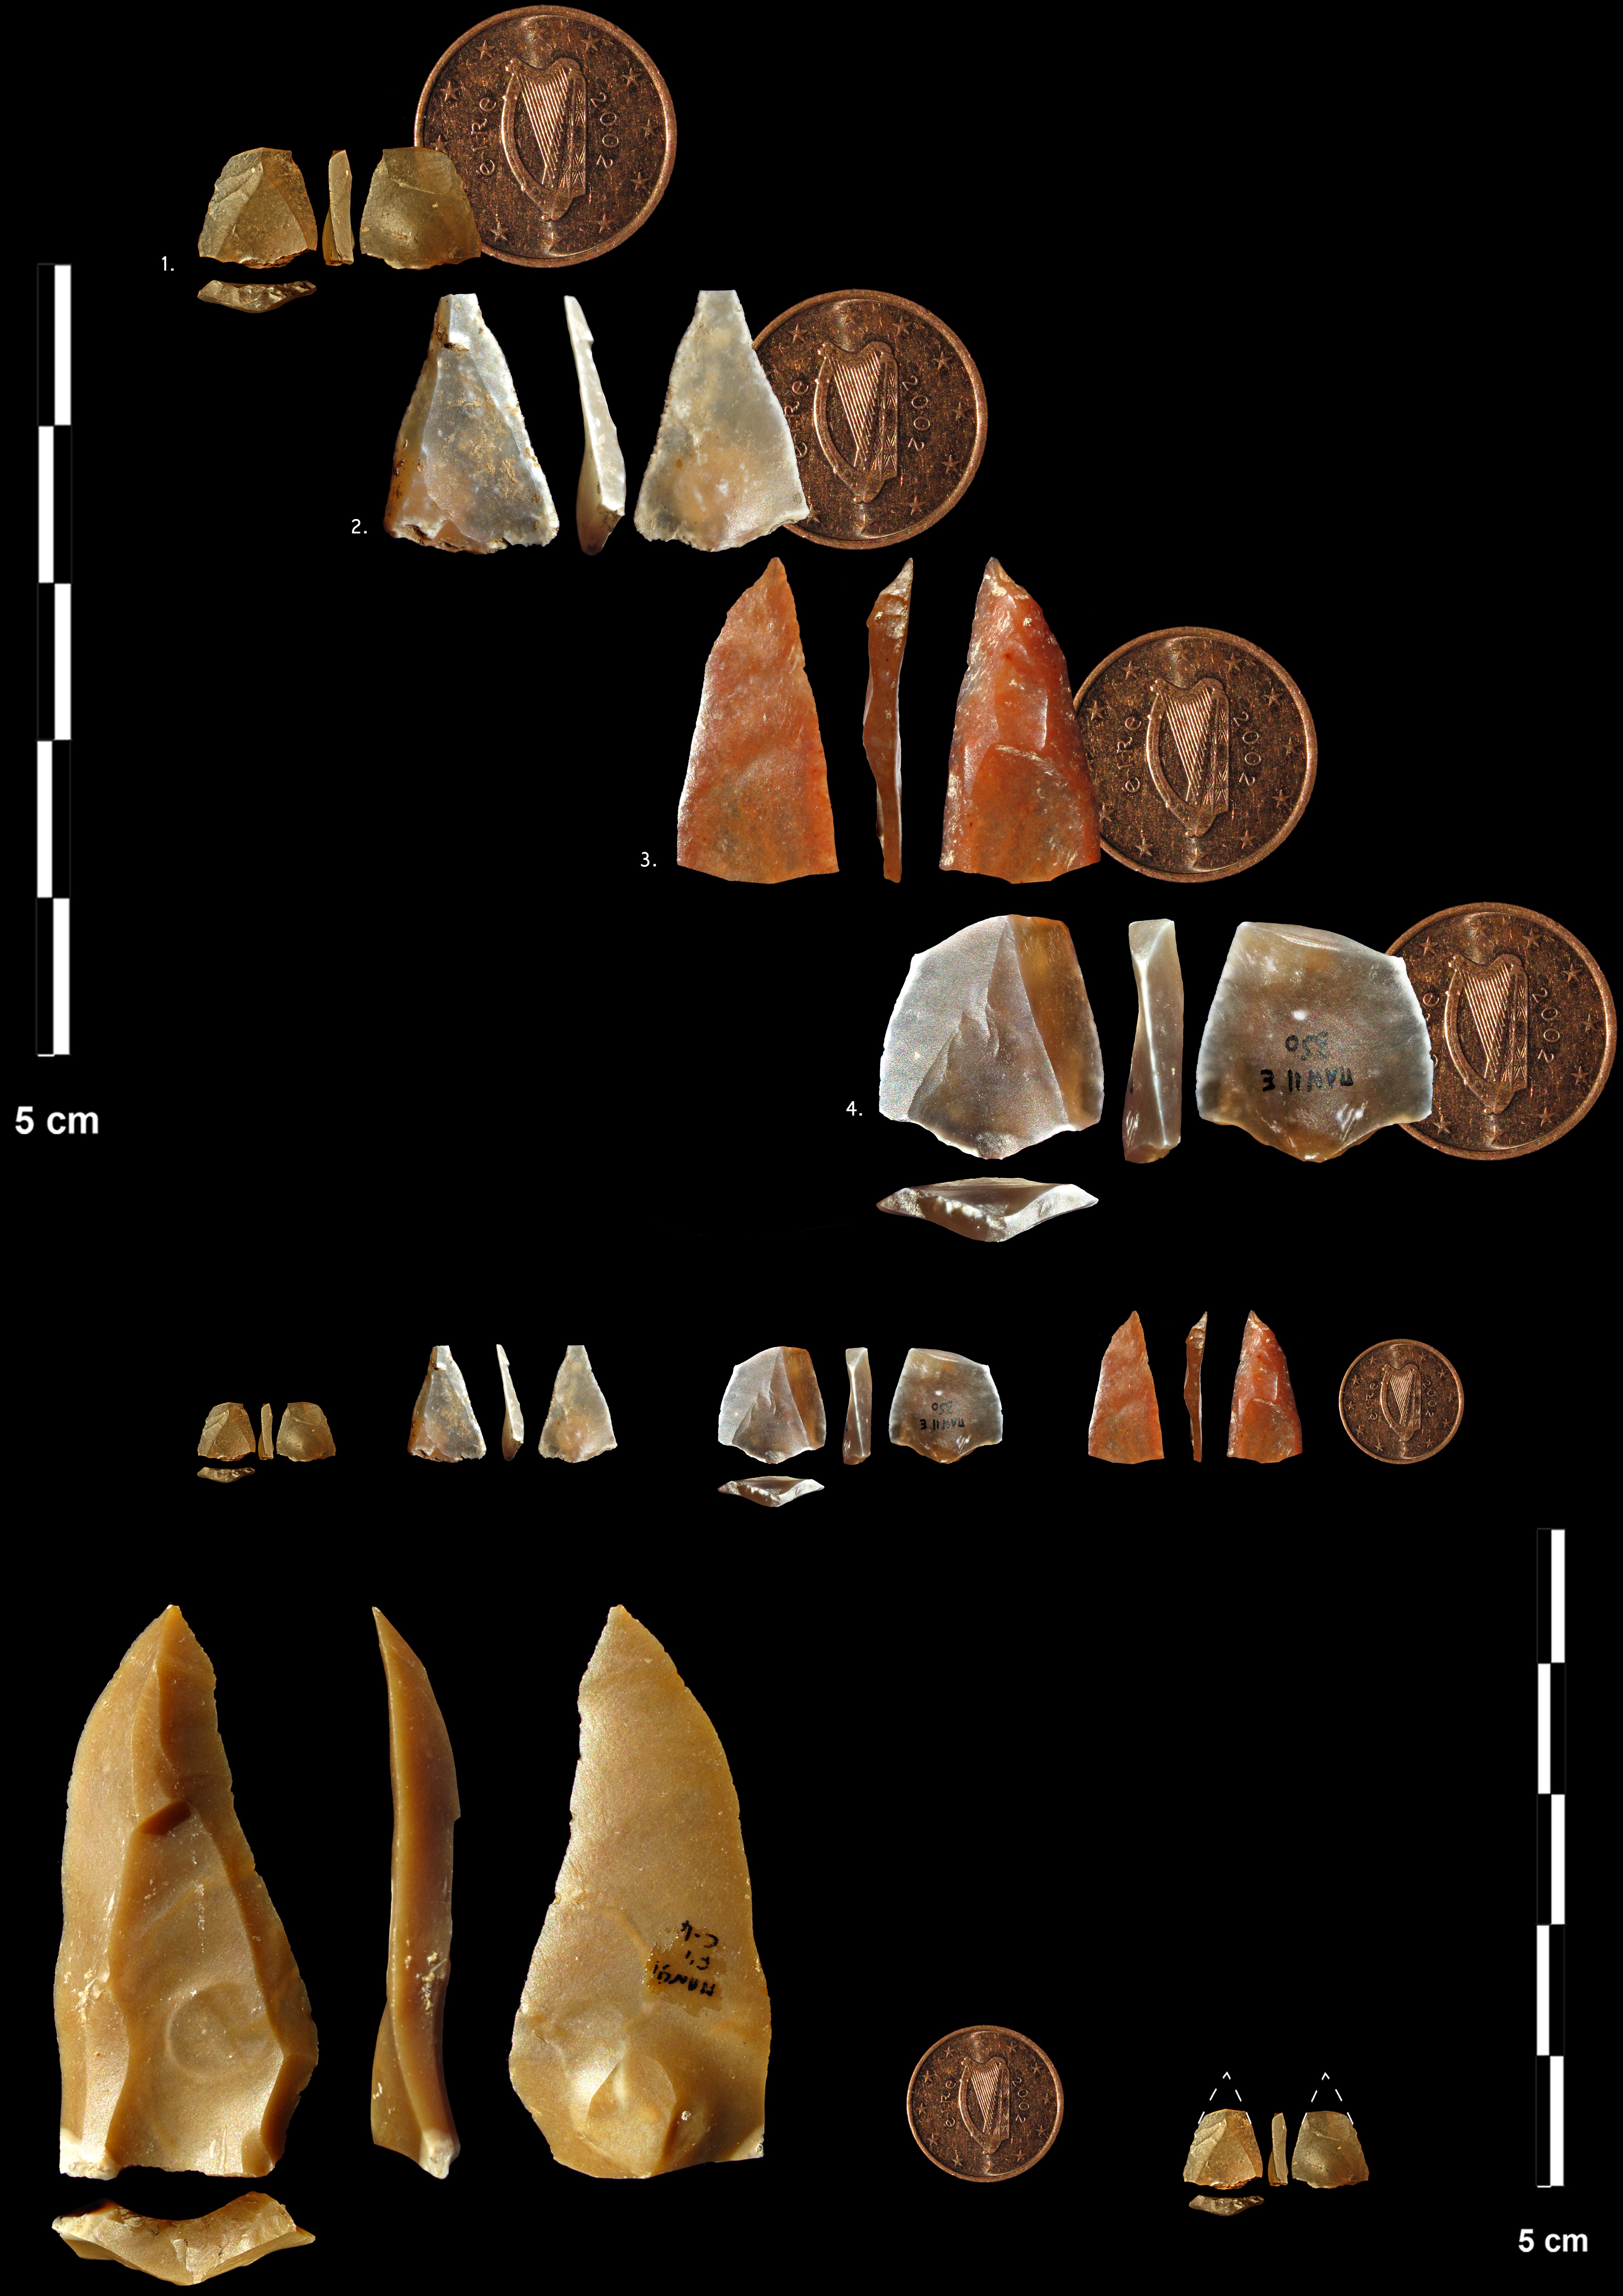 54,000-Year-Old Stone Points Are Oldest Signs of Bow and Arrow Use in Europe